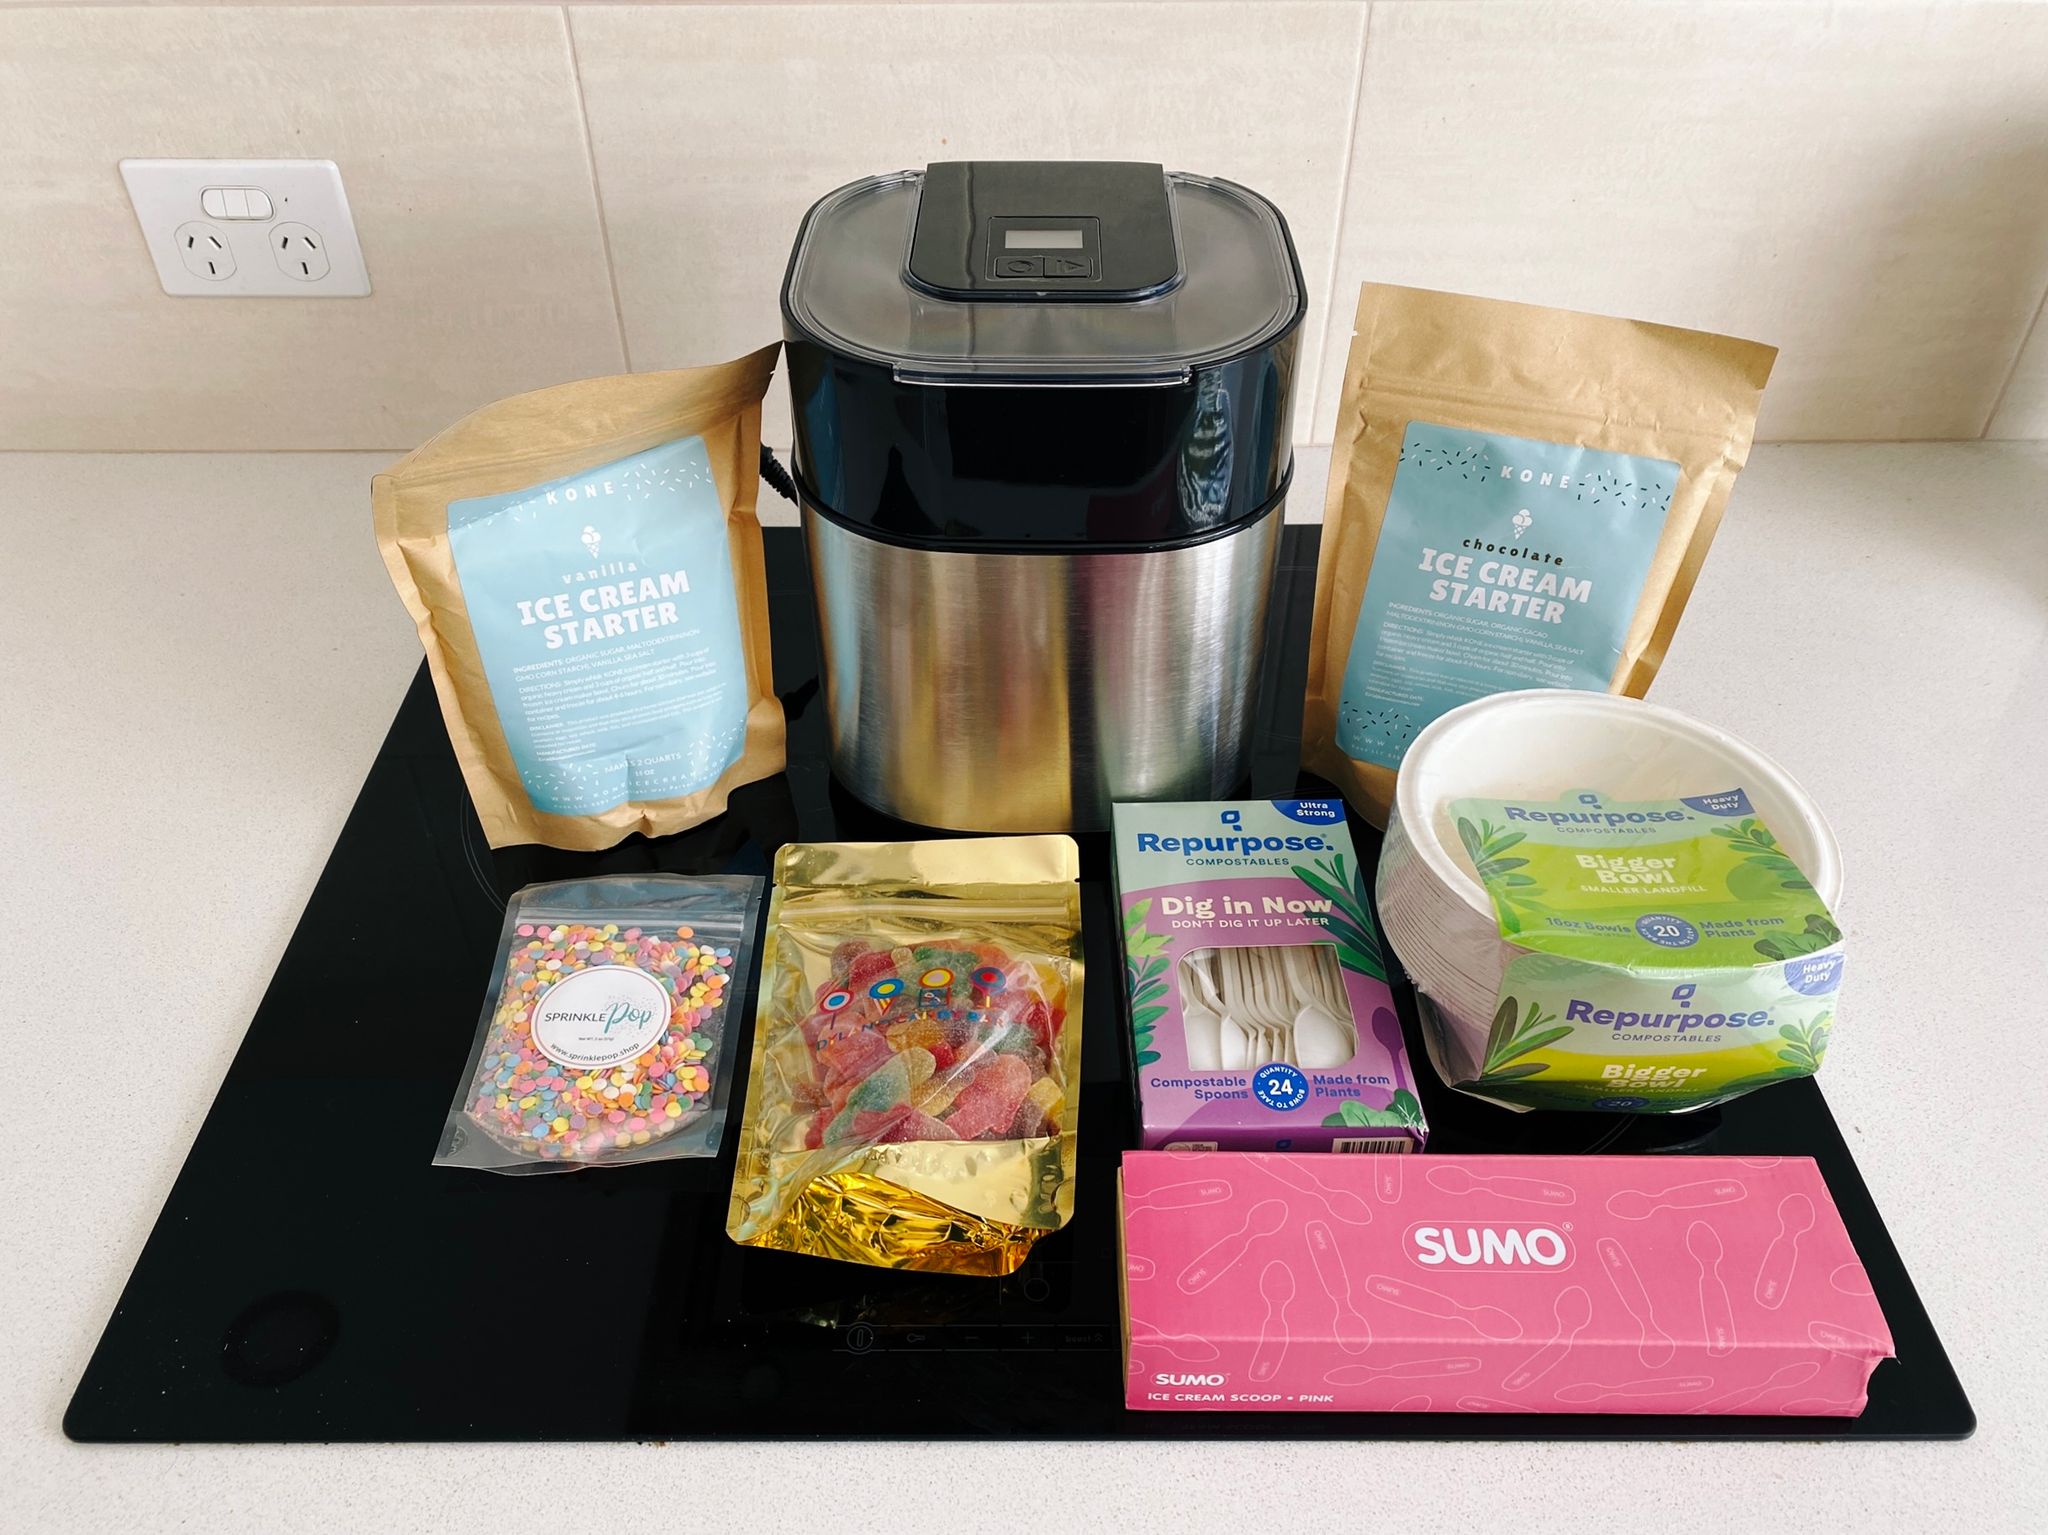 A photo of an ice cream maker along with a vanilla and chocolate ice cream starter mix, some sprinkles, a packet of lollies, an ice cream scoop, and some biodegradable bowls and spoons.